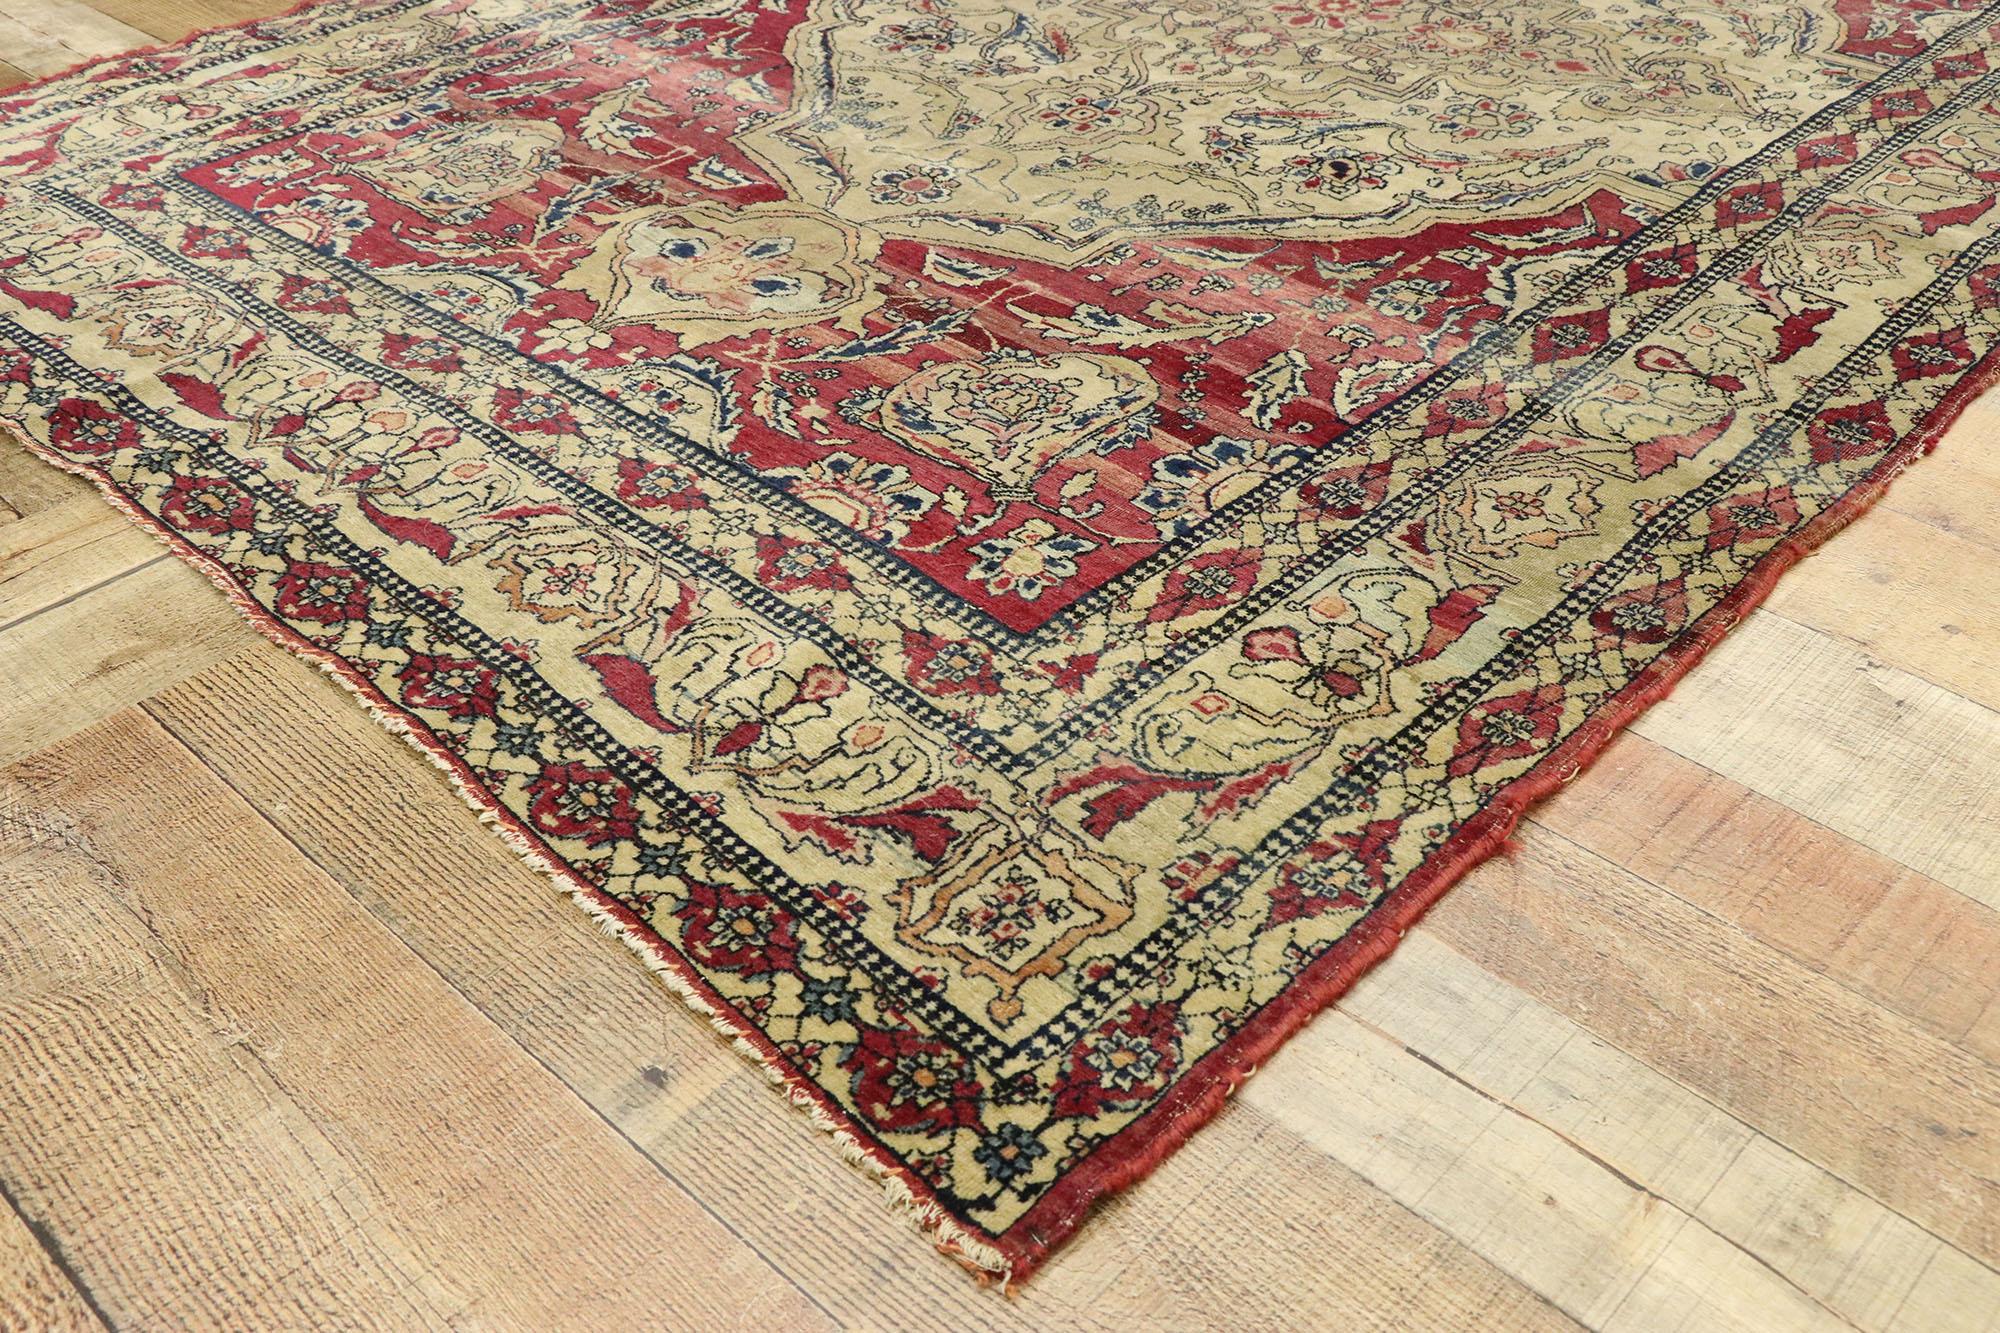 20th Century Distressed Antique Persian Kerman Rug with Modern Rustic English Style For Sale